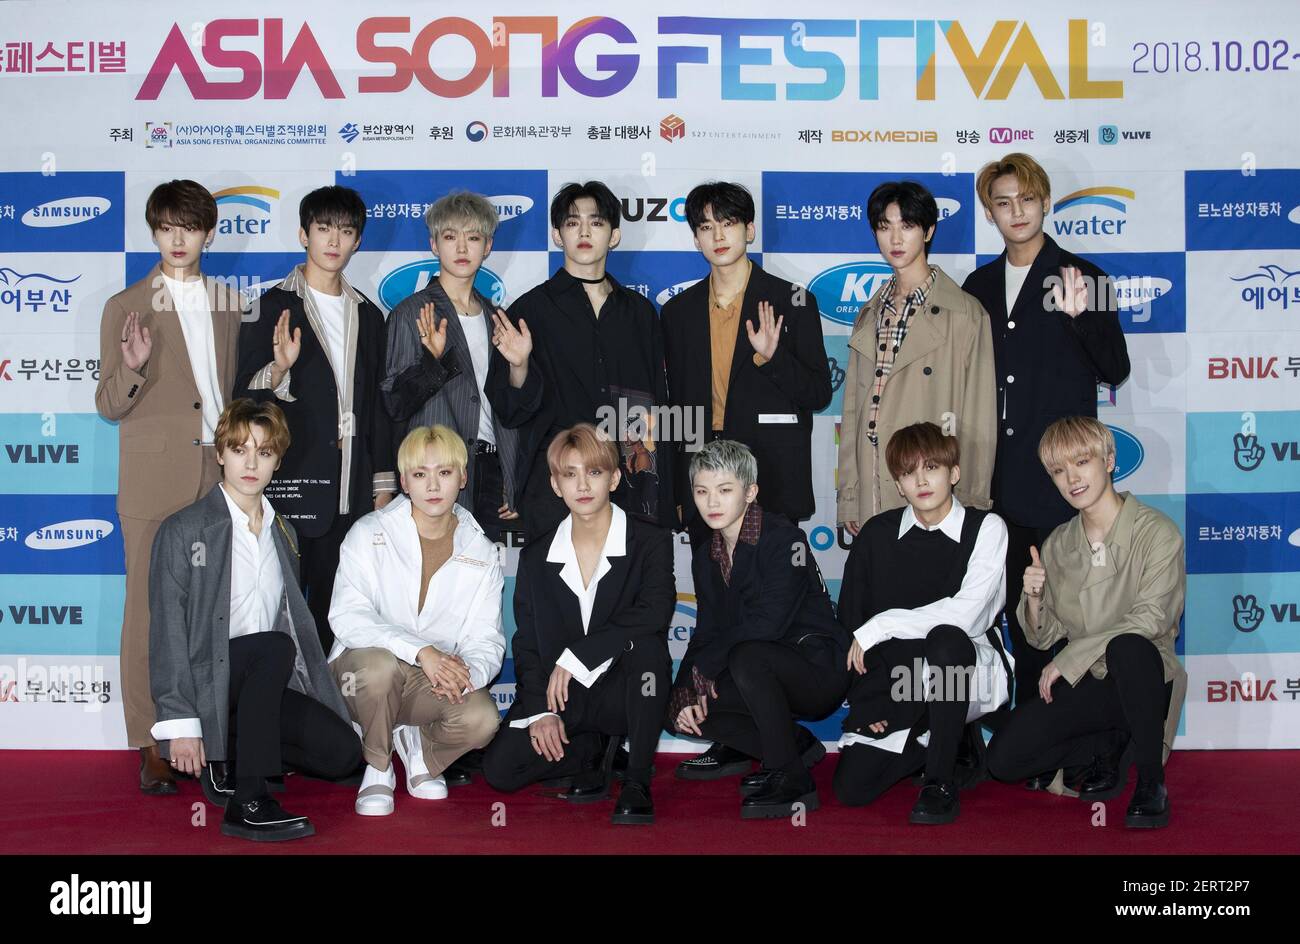 South Korean K-Pop boys group Seventeen, attend a photo call for before  their live concert "15th Asia Song Festival" at Asian Games Stadium in  Busan, South Korea on October 3, 2018. (Photo